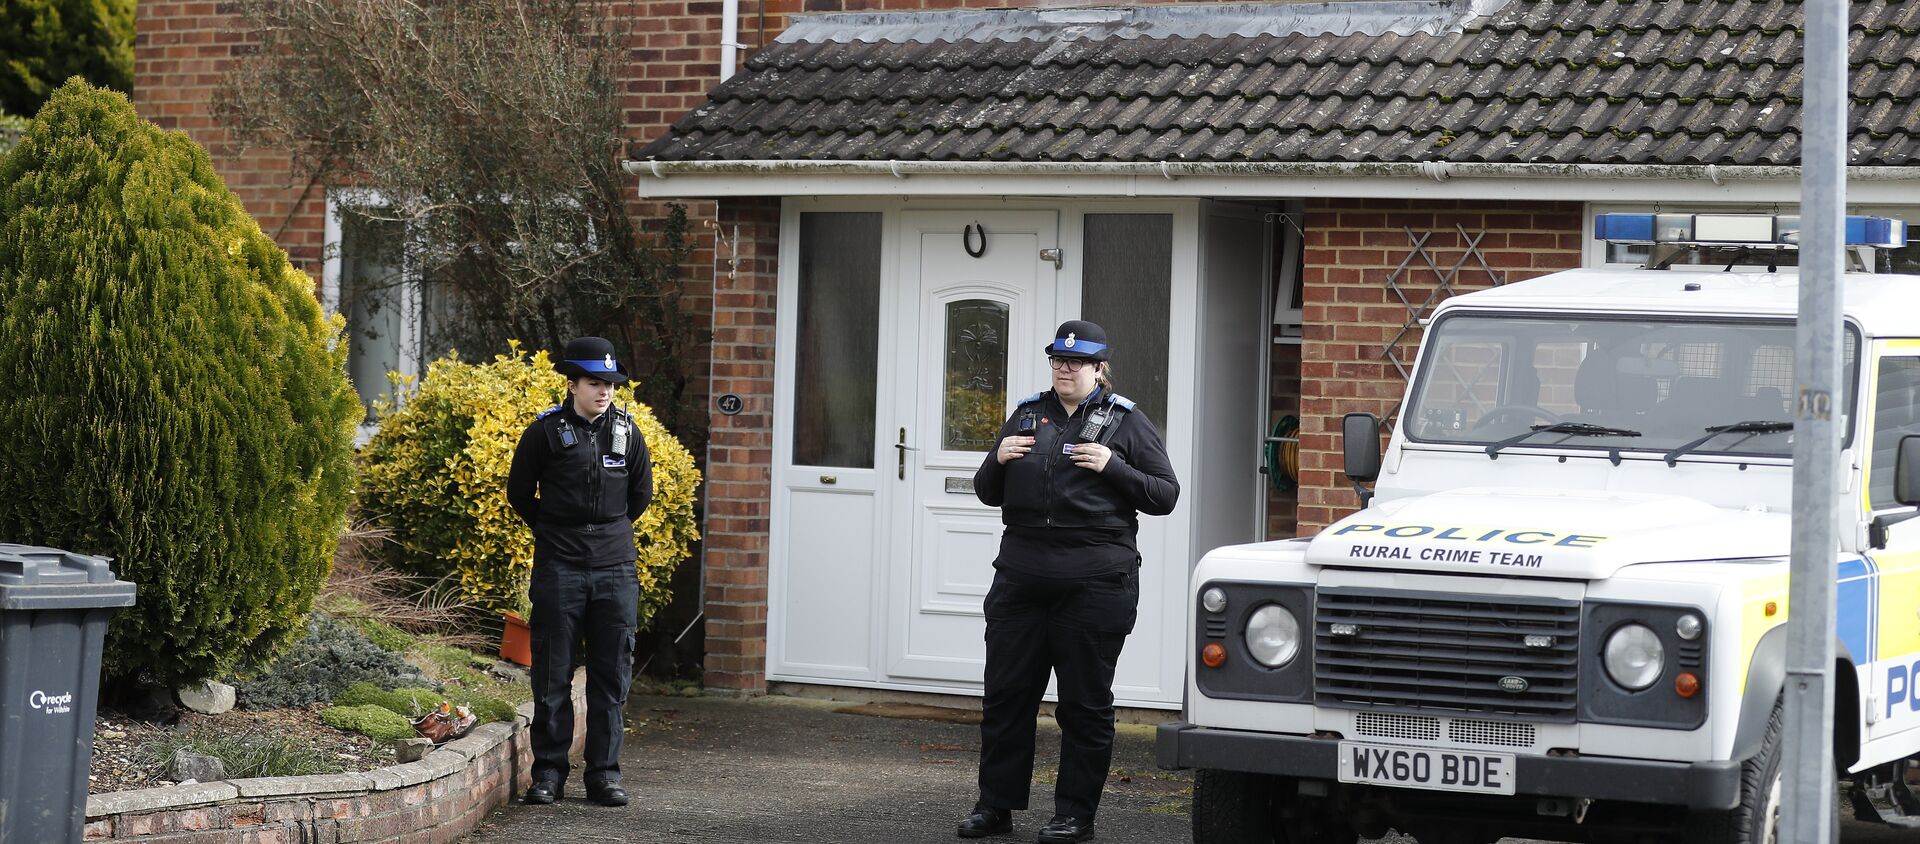 Police officers stand outside the house of former Russian double agent Sergei Skripal who was found critically ill Sunday following exposure to an unknown substance in Salisbury, England, Tuesday, March 6, 2018 - Sputnik Moldova, 1920, 02.08.2019